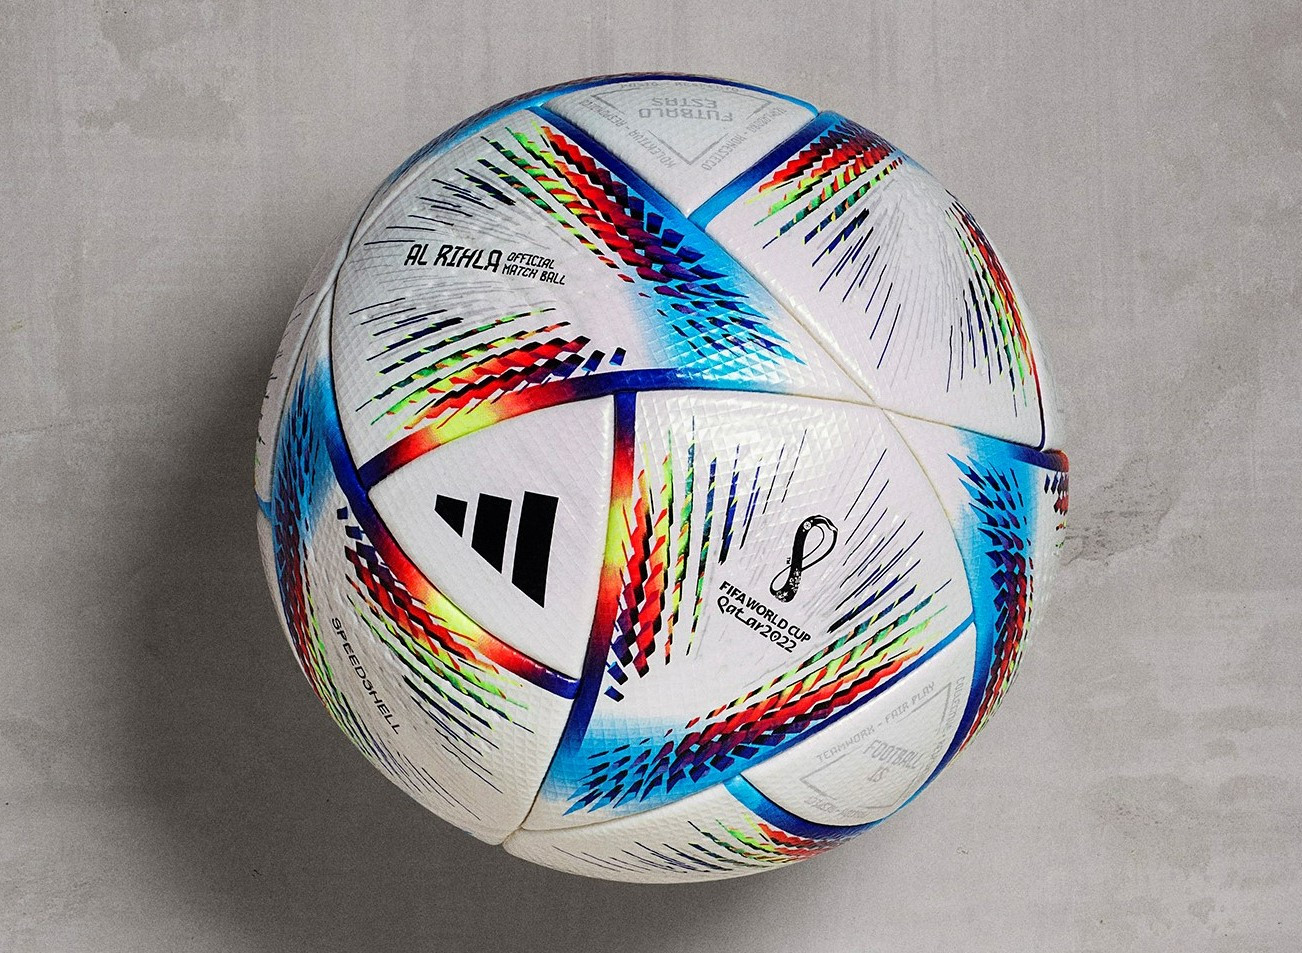 The FIFA World Cup 2022 Ball